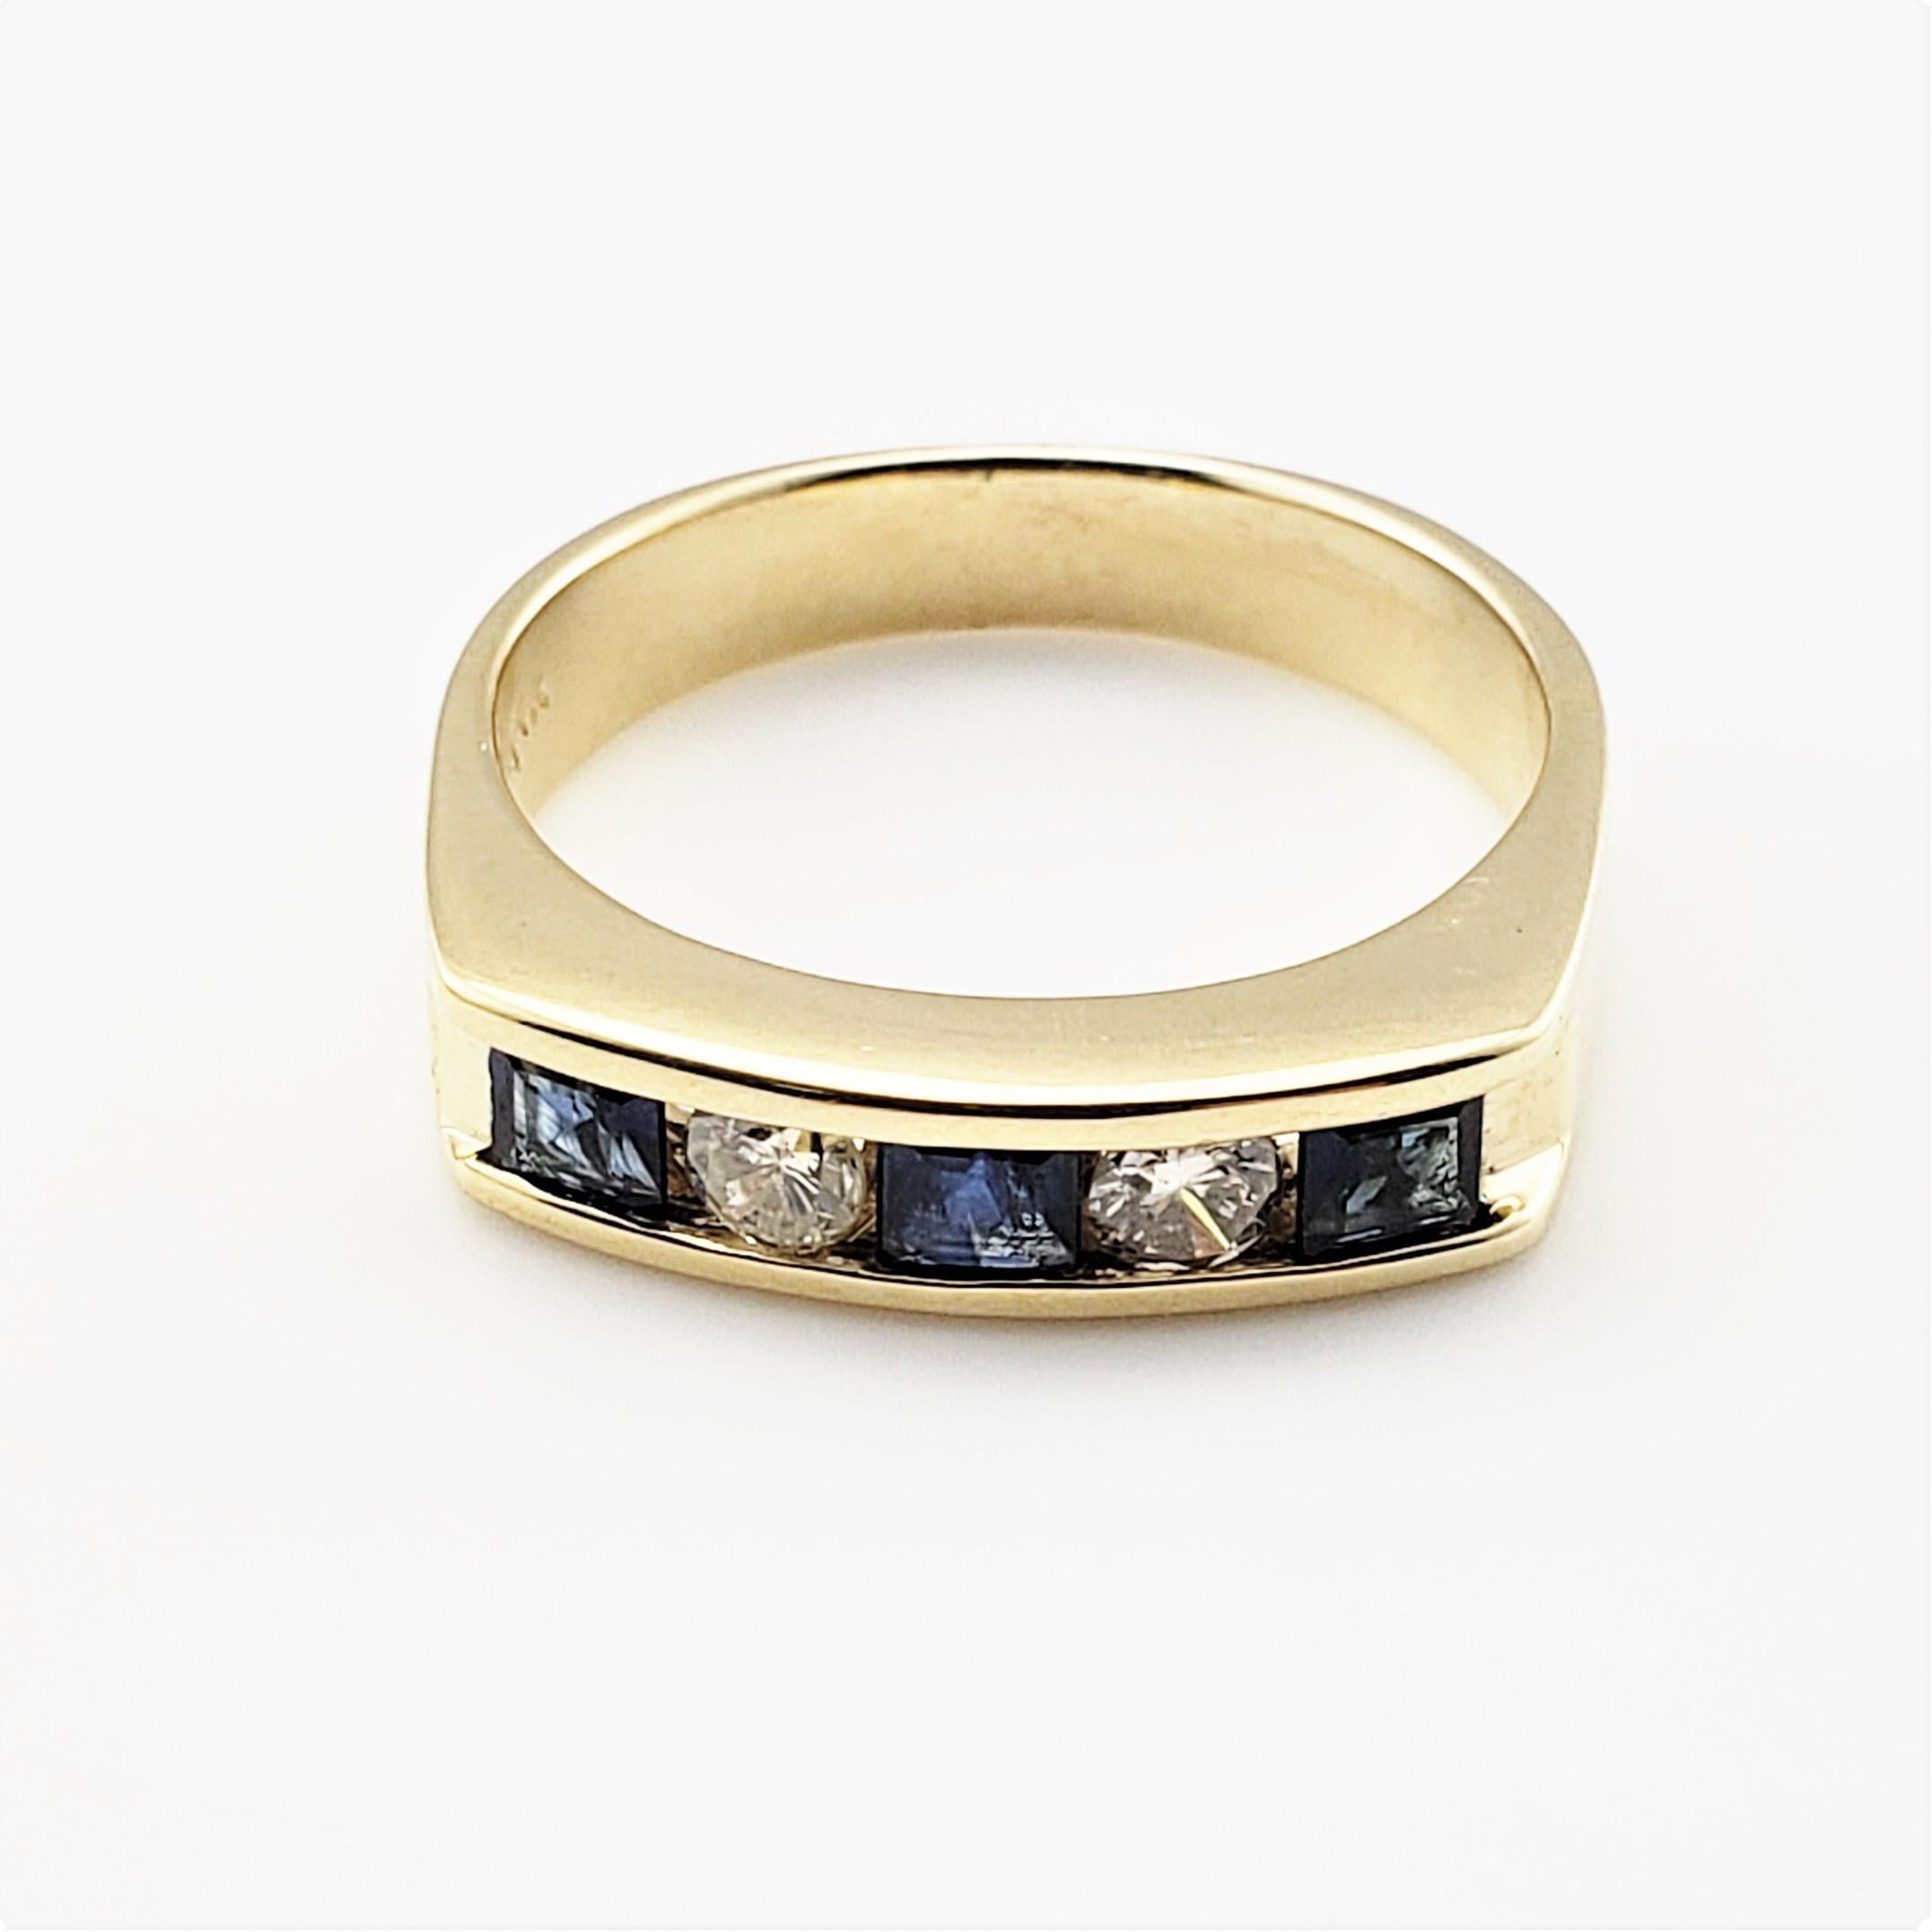 14 Karat Yellow Gold Sapphire and Diamond Ring Size 6.25 GAI Certified-

This stunning ring features three round sapphires and two round brilliant cut diamonds set in classic 14K yellow gold. Width: 4 mm.
Shank: 3 mm.

Total sapphire weight: .33